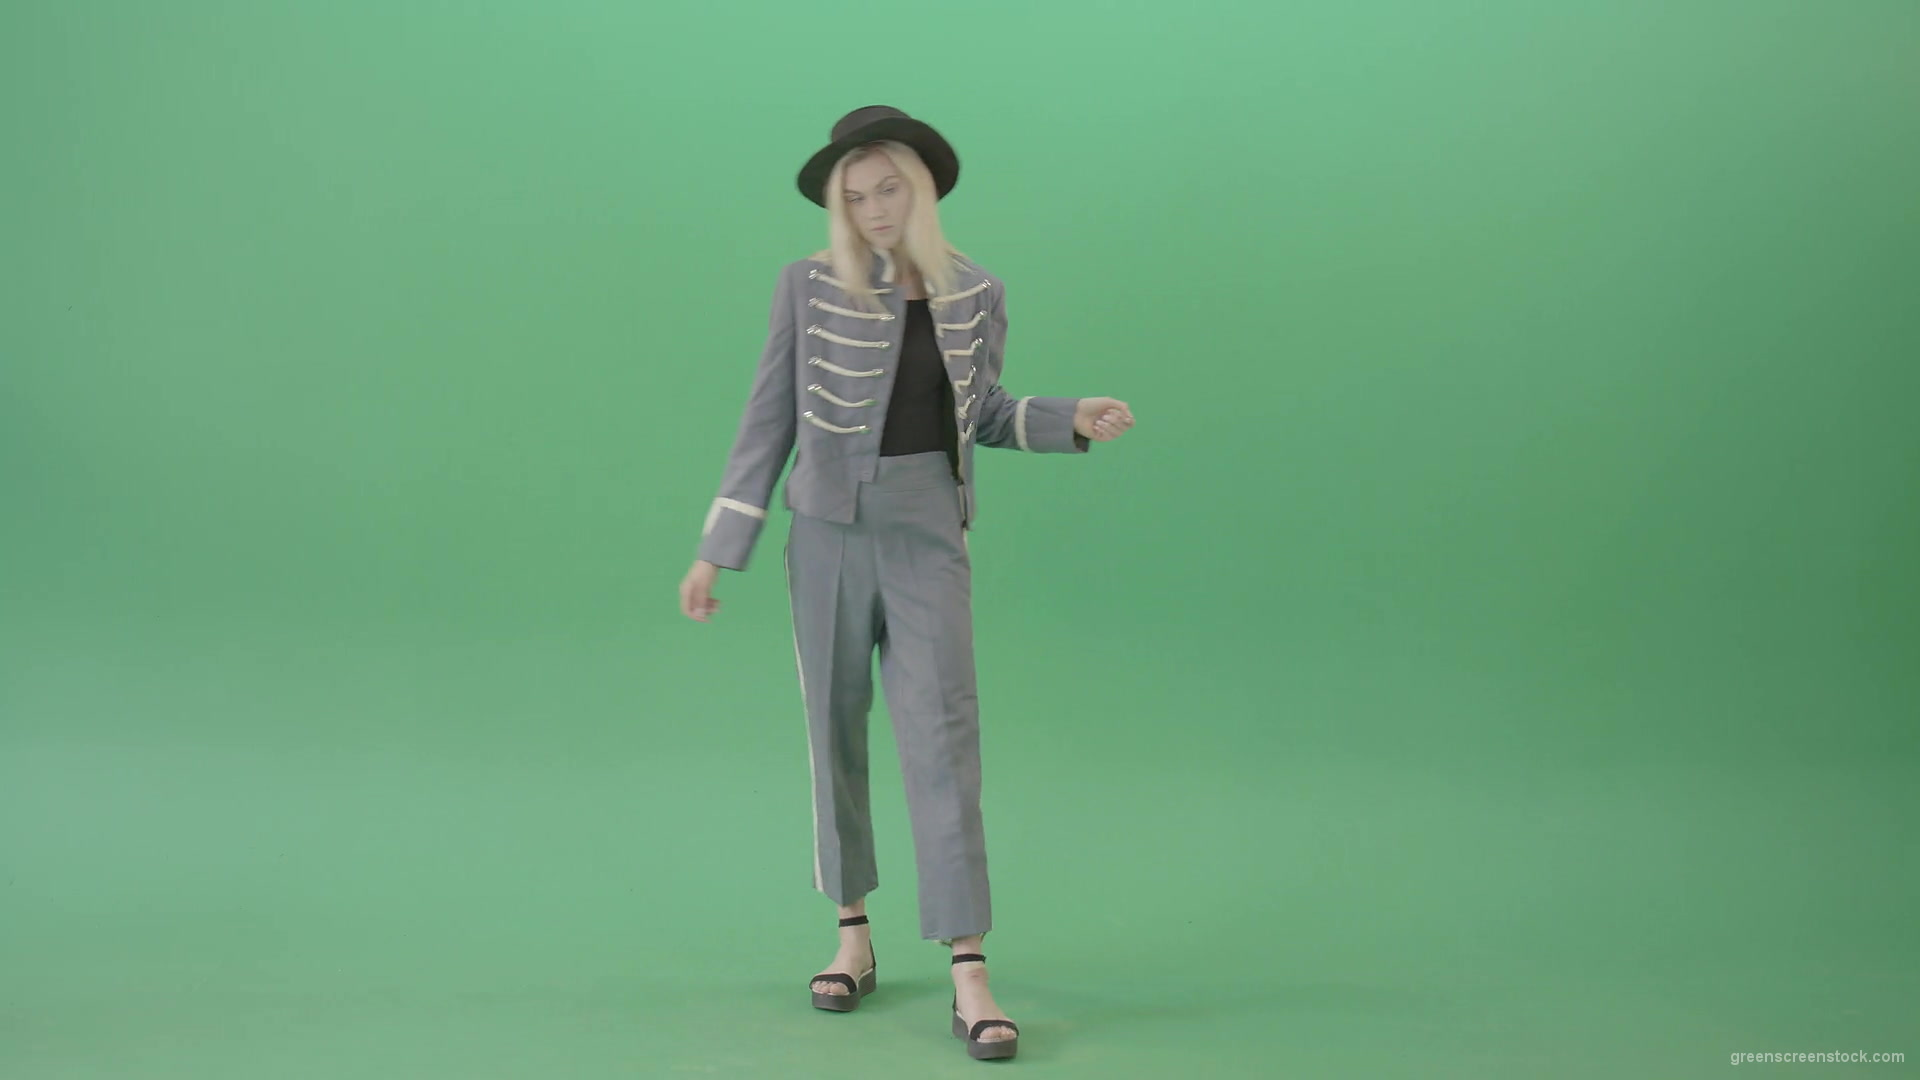 Blonde-Girl-in-Royal-dress-and-black-hat-dancing-house-and-chilling-in-green-screen-studio-4K-Video-Footage-1920_007 Green Screen Stock